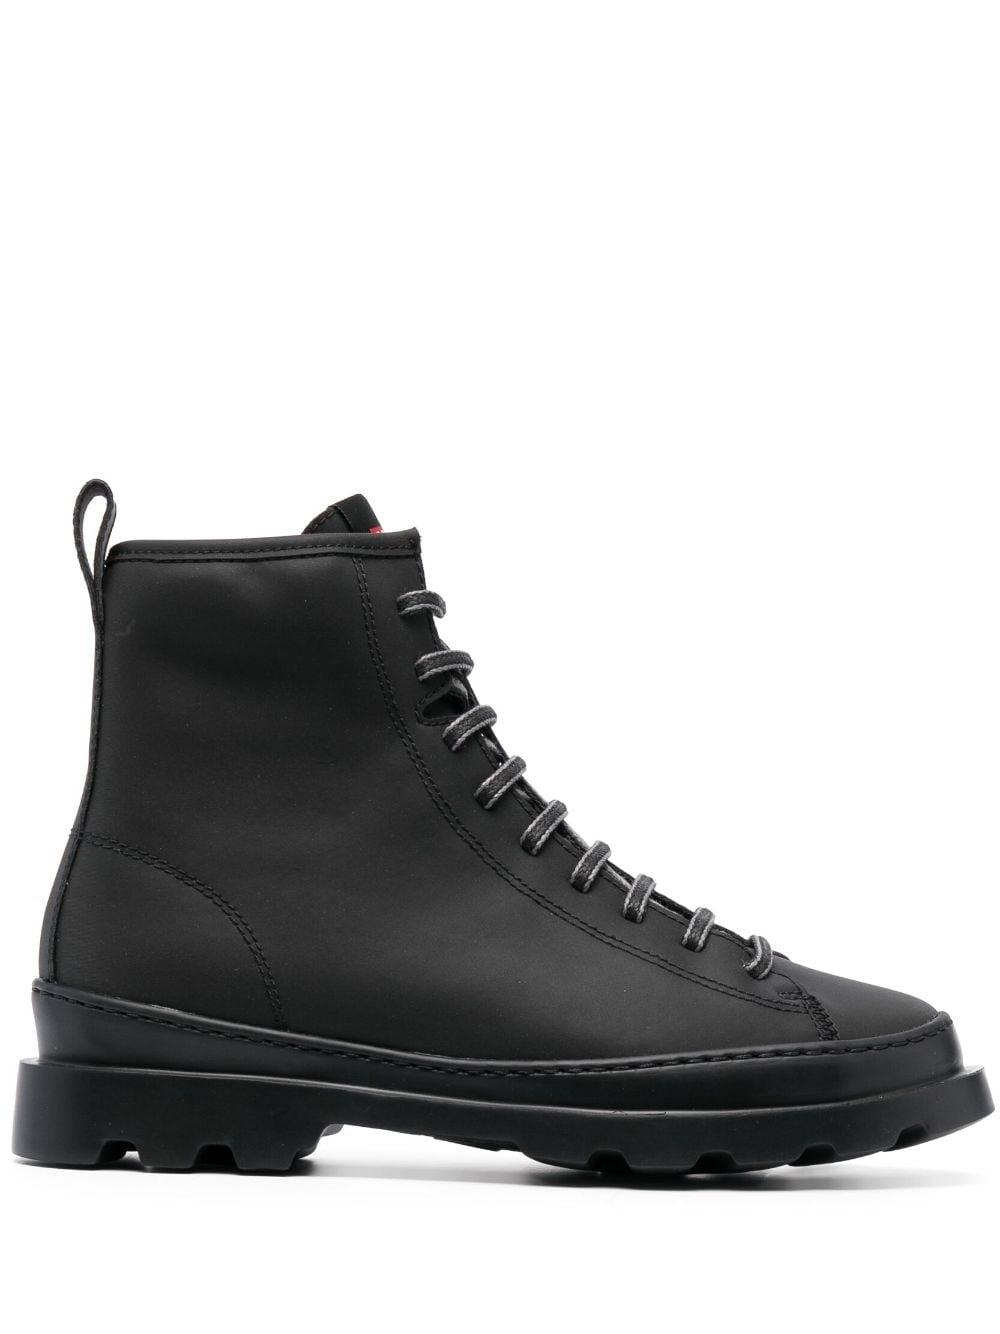 Camper Brutus Lace-up Leather Boots in Black | Lyst